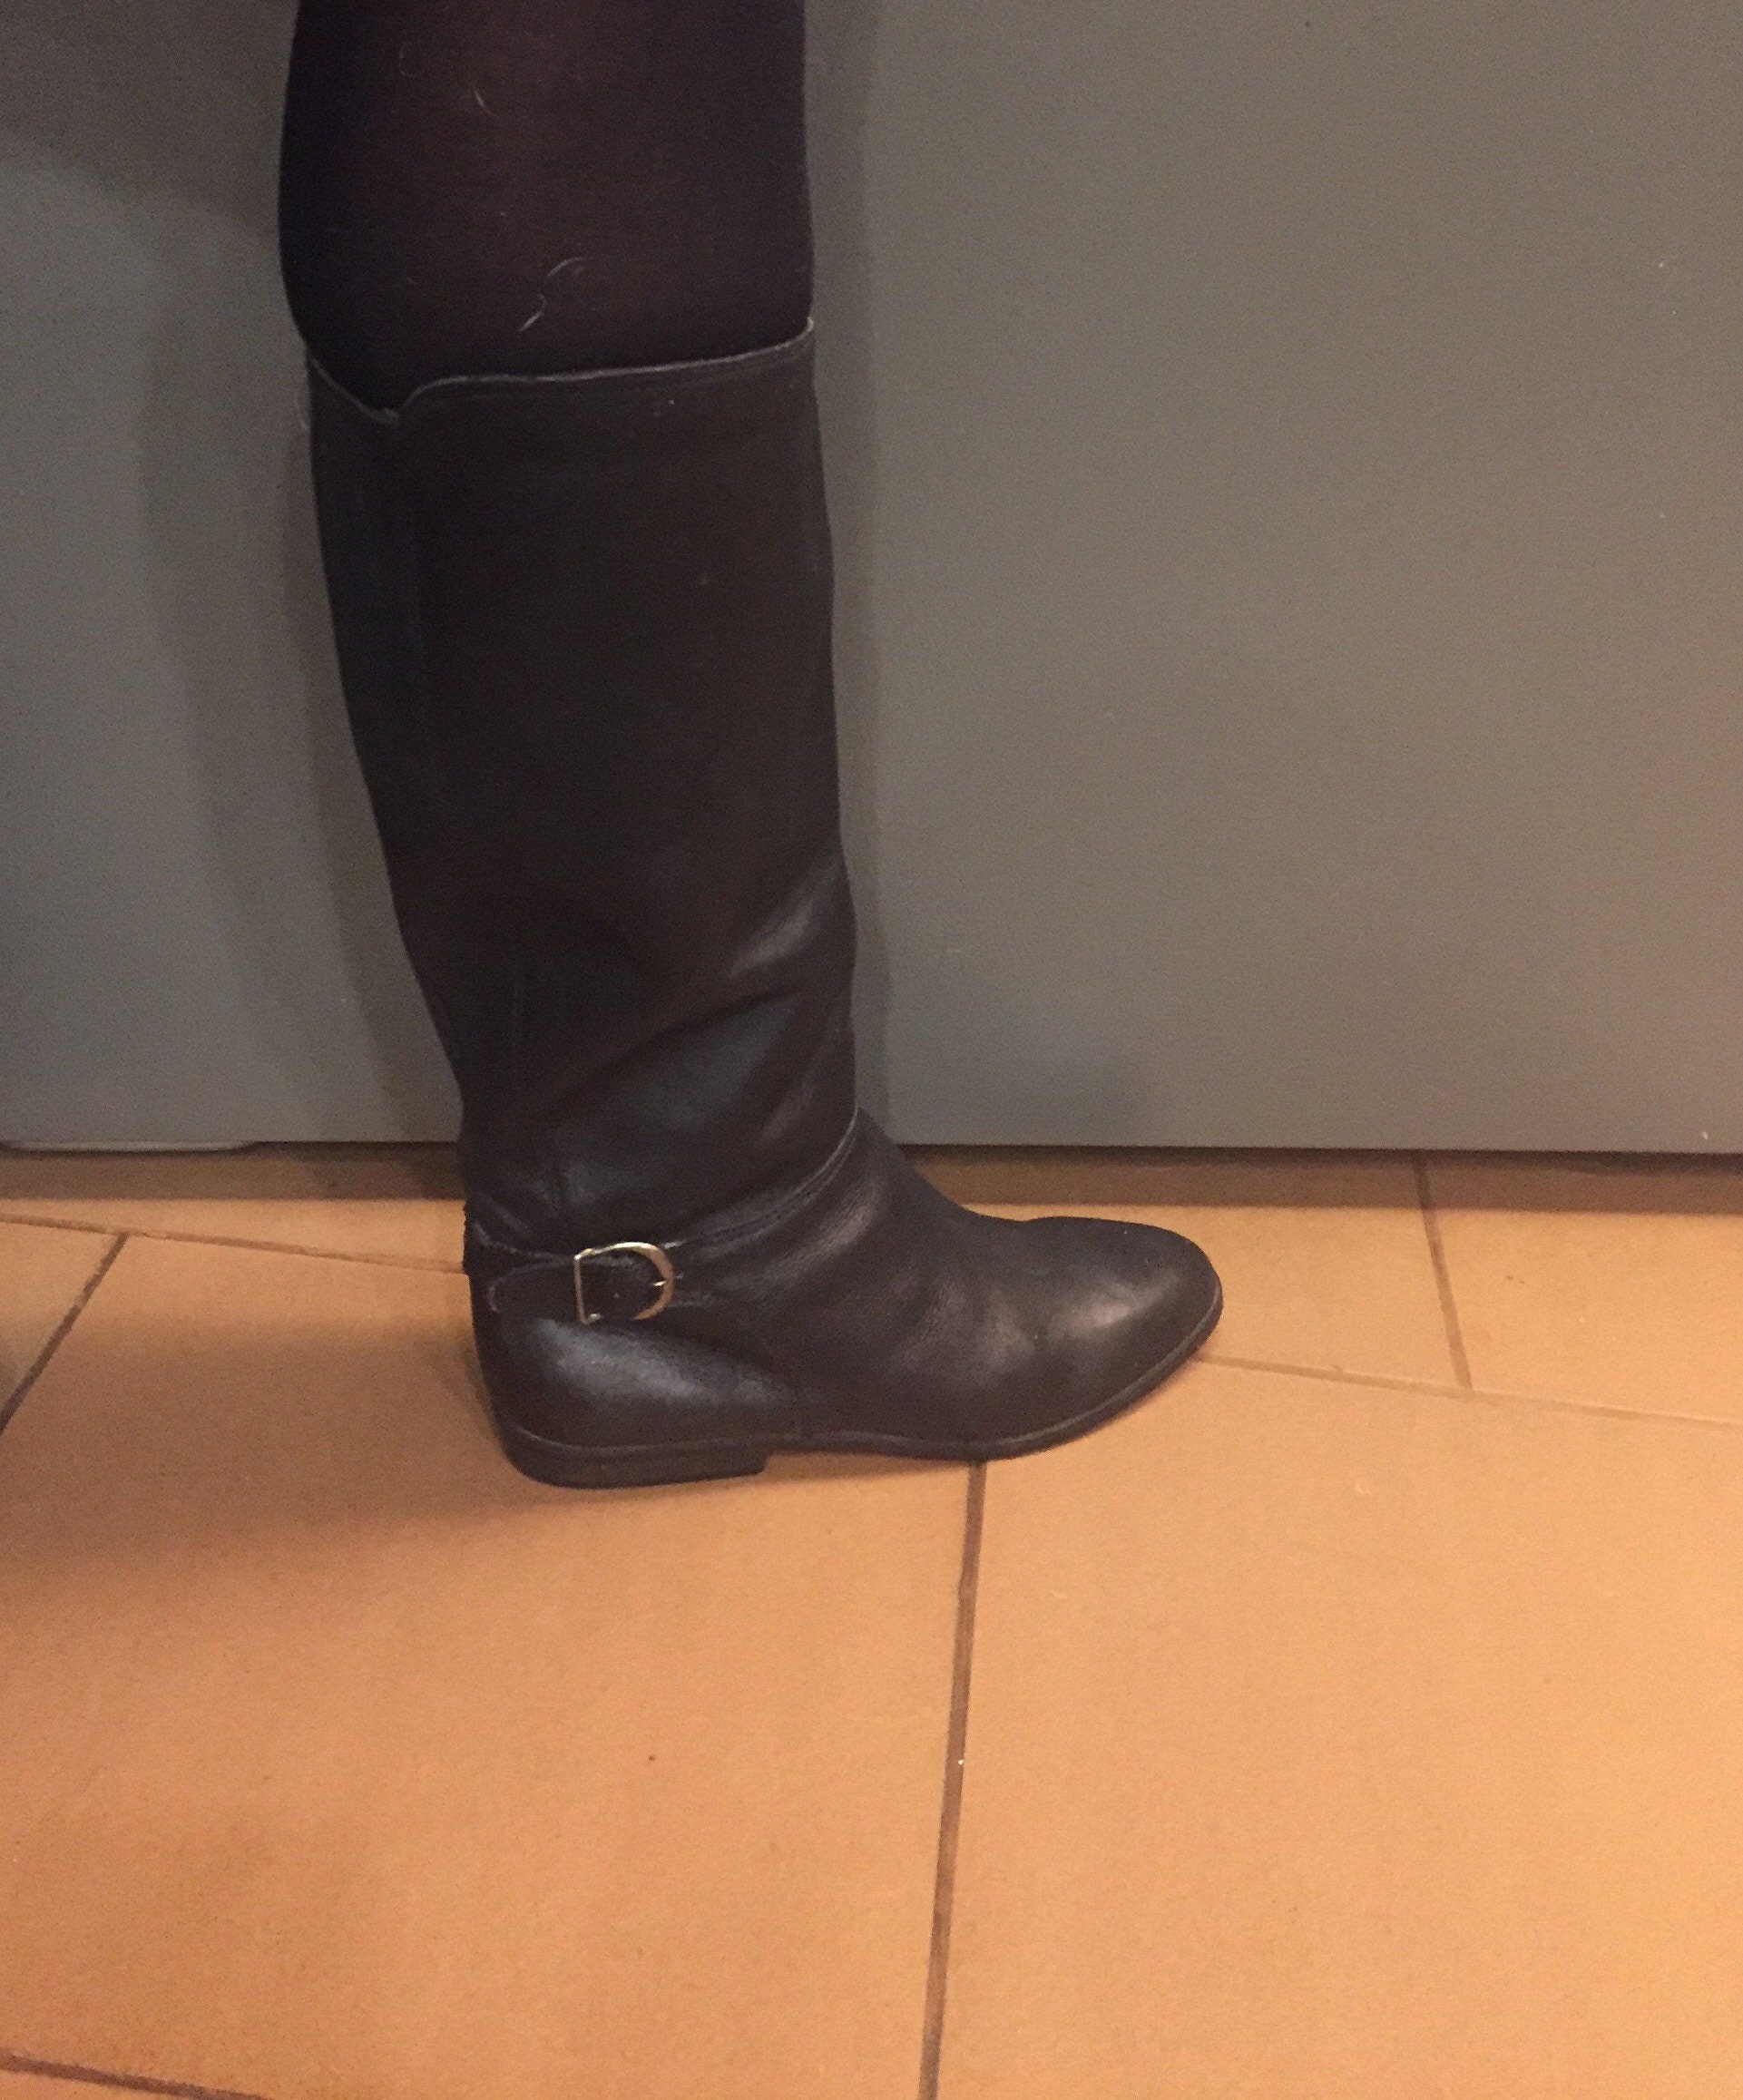 Boots , Vintage Catleia Made in Brazil Boots 7 M Black Leather 1990 - Etsy